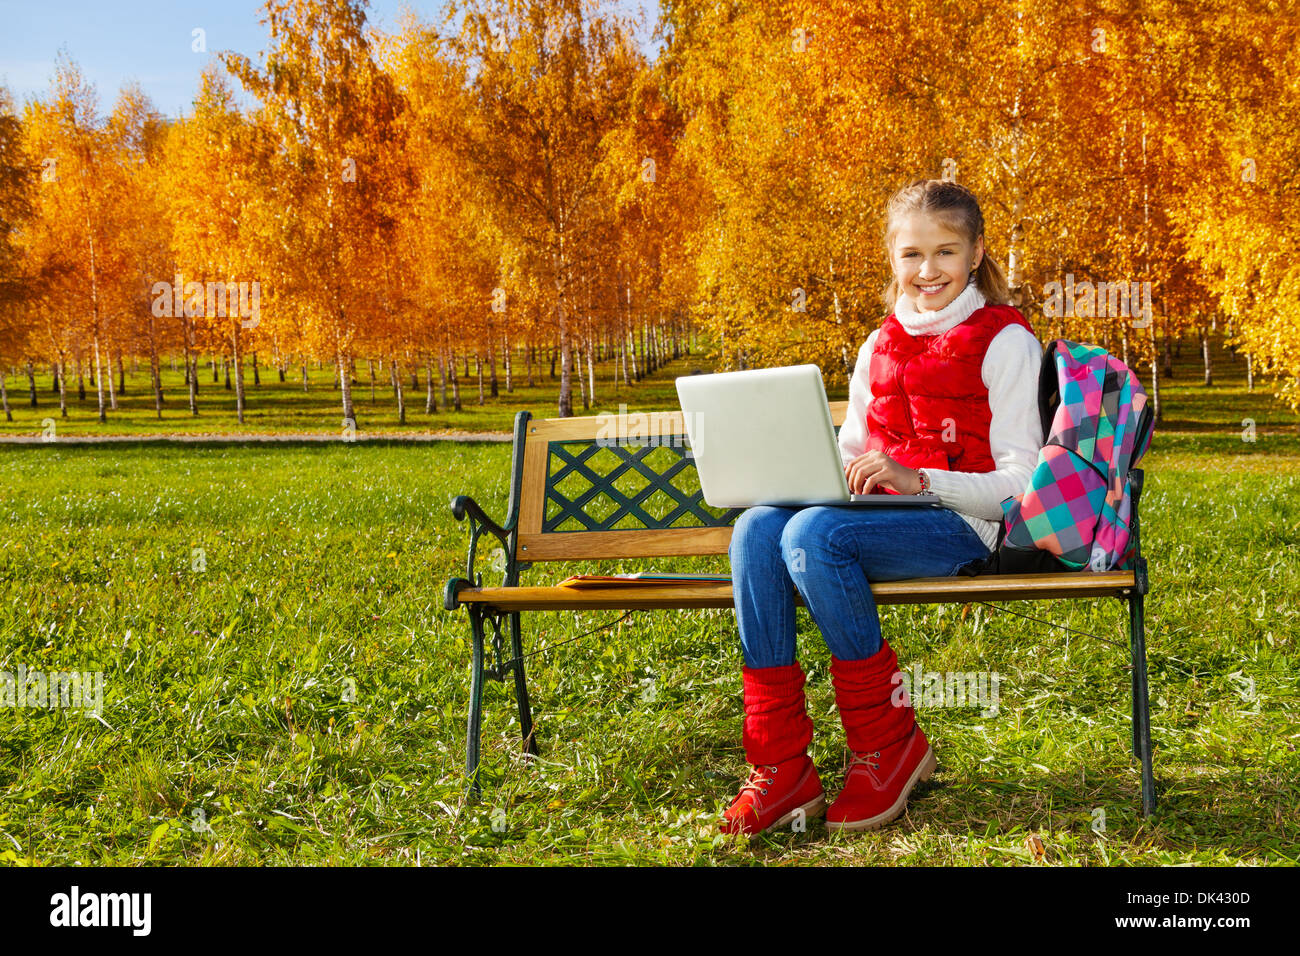 Happy blond 11 years old girl with amazing smile sitting on the bench with laptop doing homework outside in the autumn park on sunny day Stock Photo